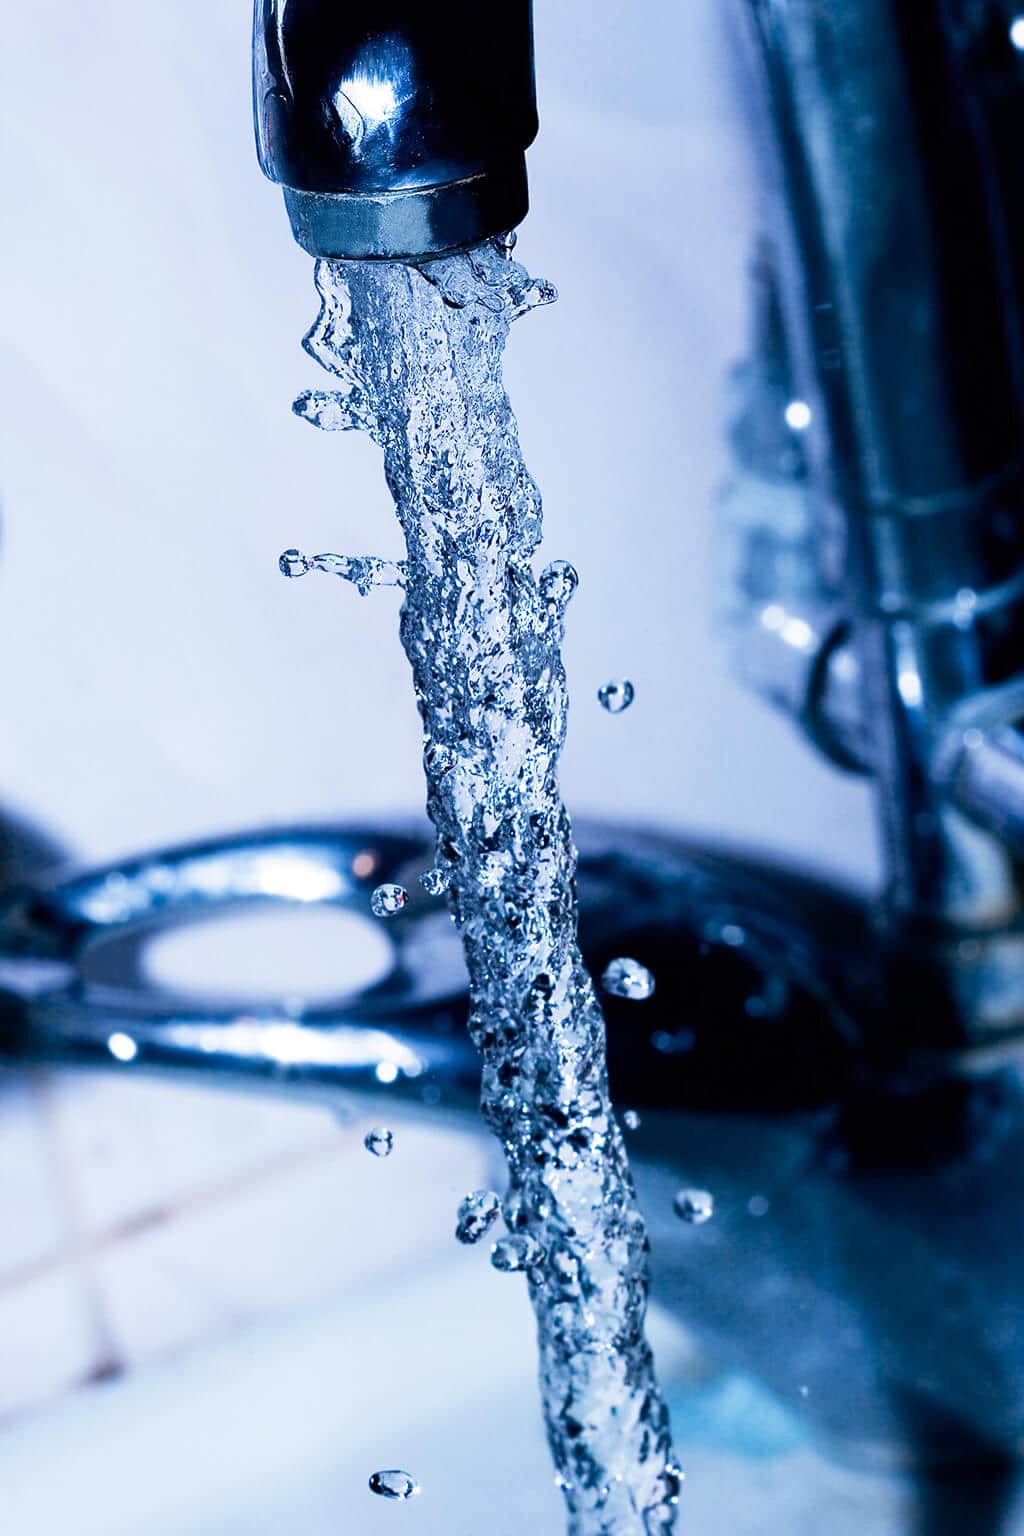 High Water Pressure Can Cause Expensive Problems | Tips from Your Trusted Hurst, TX Plumber